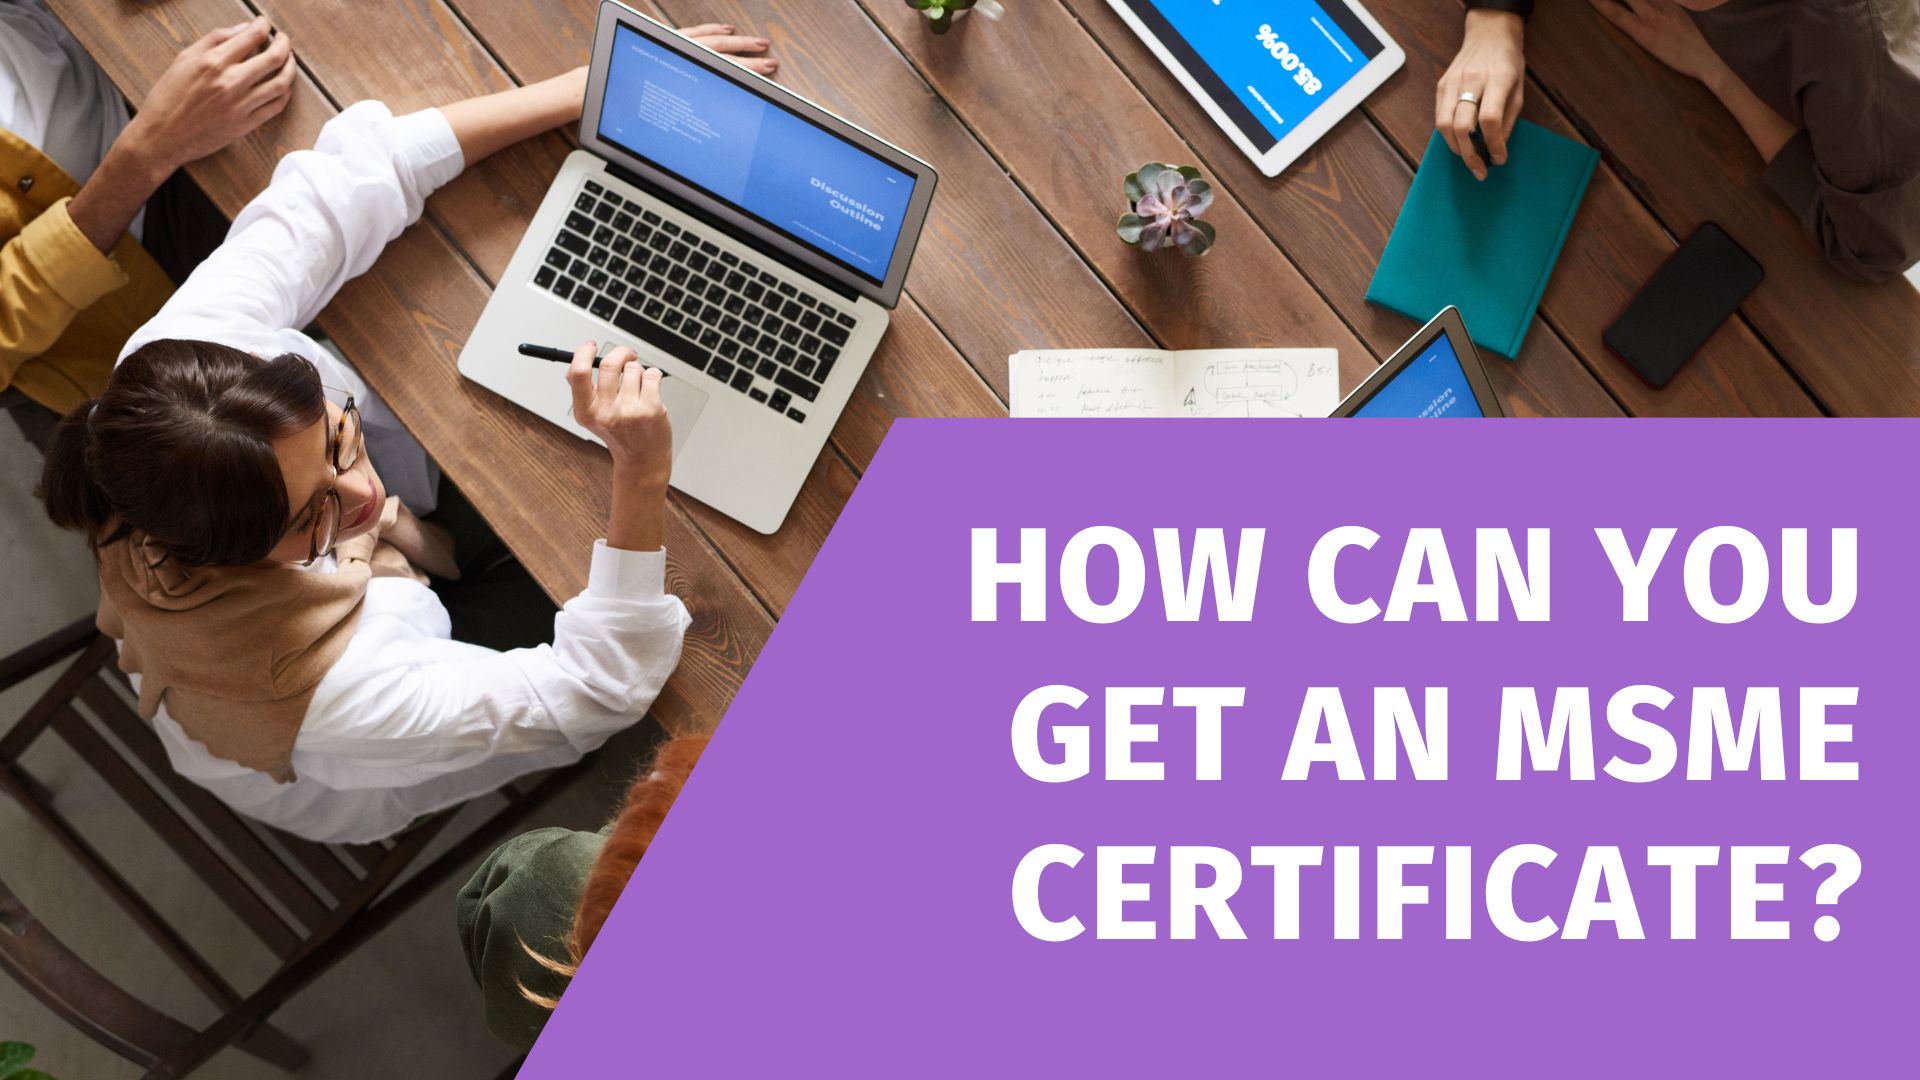 How can you get an MSME certificate